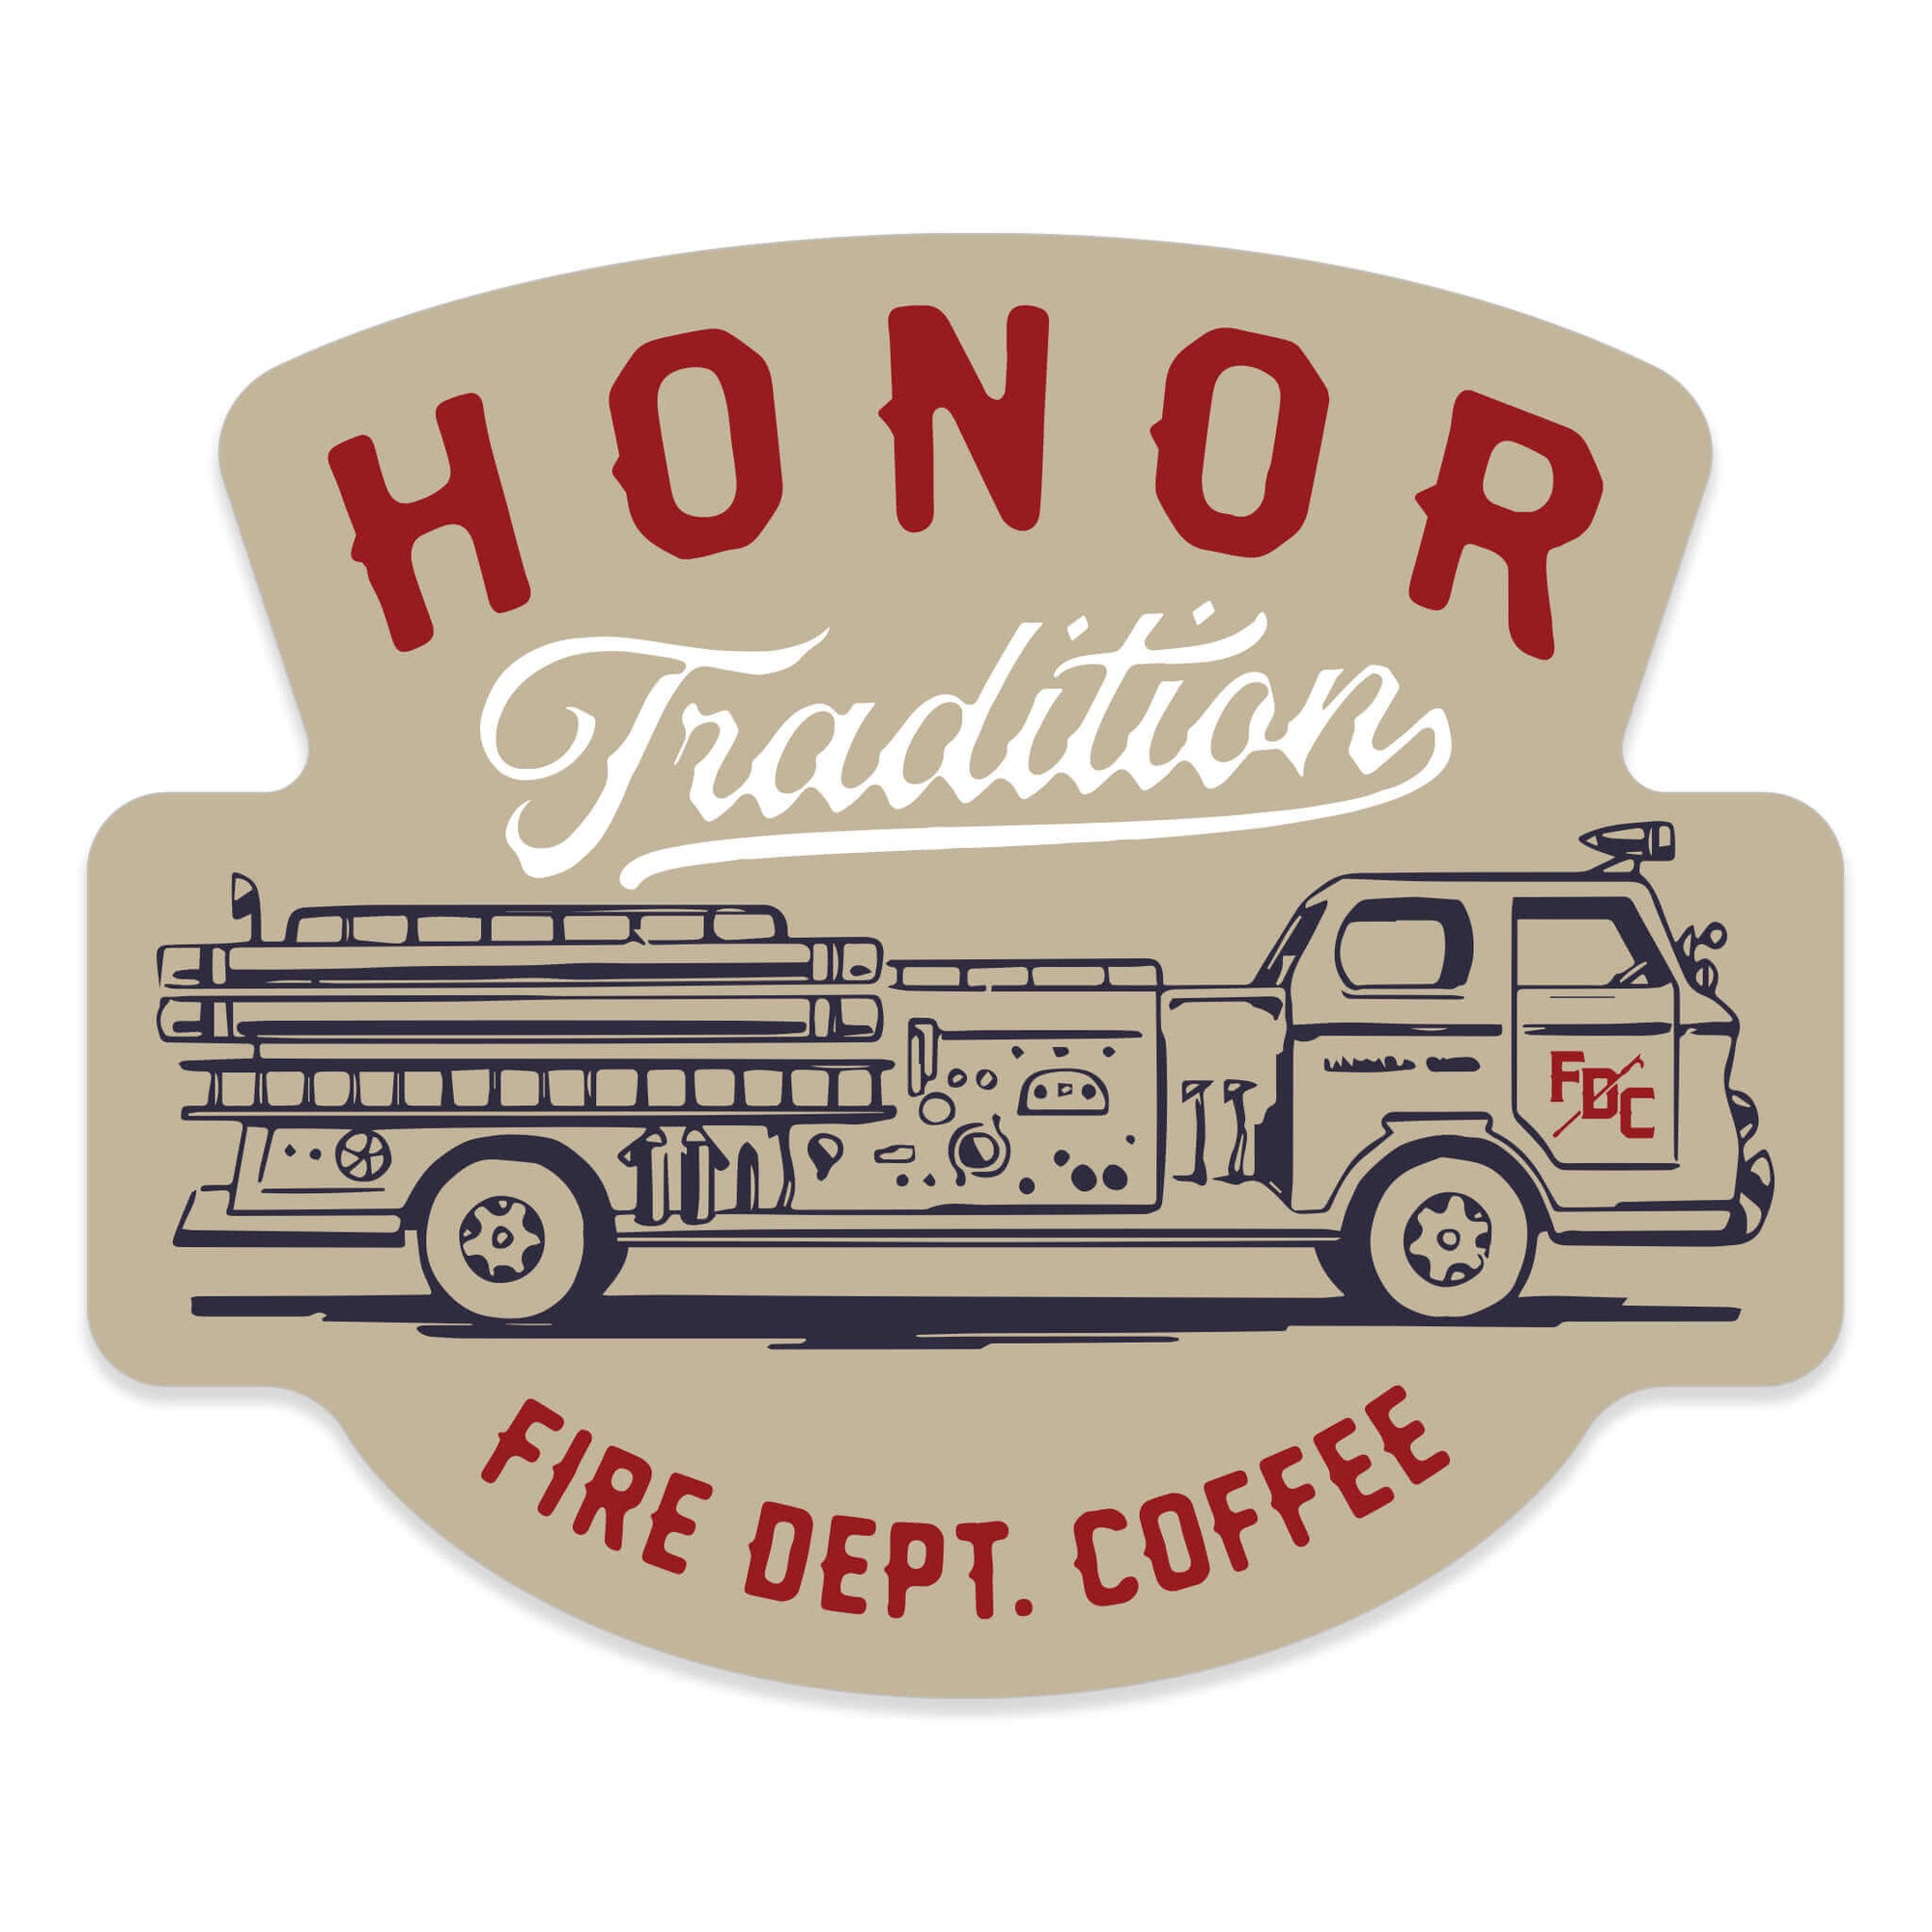 Tan sticker with a vintage fire truck drawing in navy that says "honor tradition" in red and white above the fire truck and "Fire Dept. Coffee" below the truck.